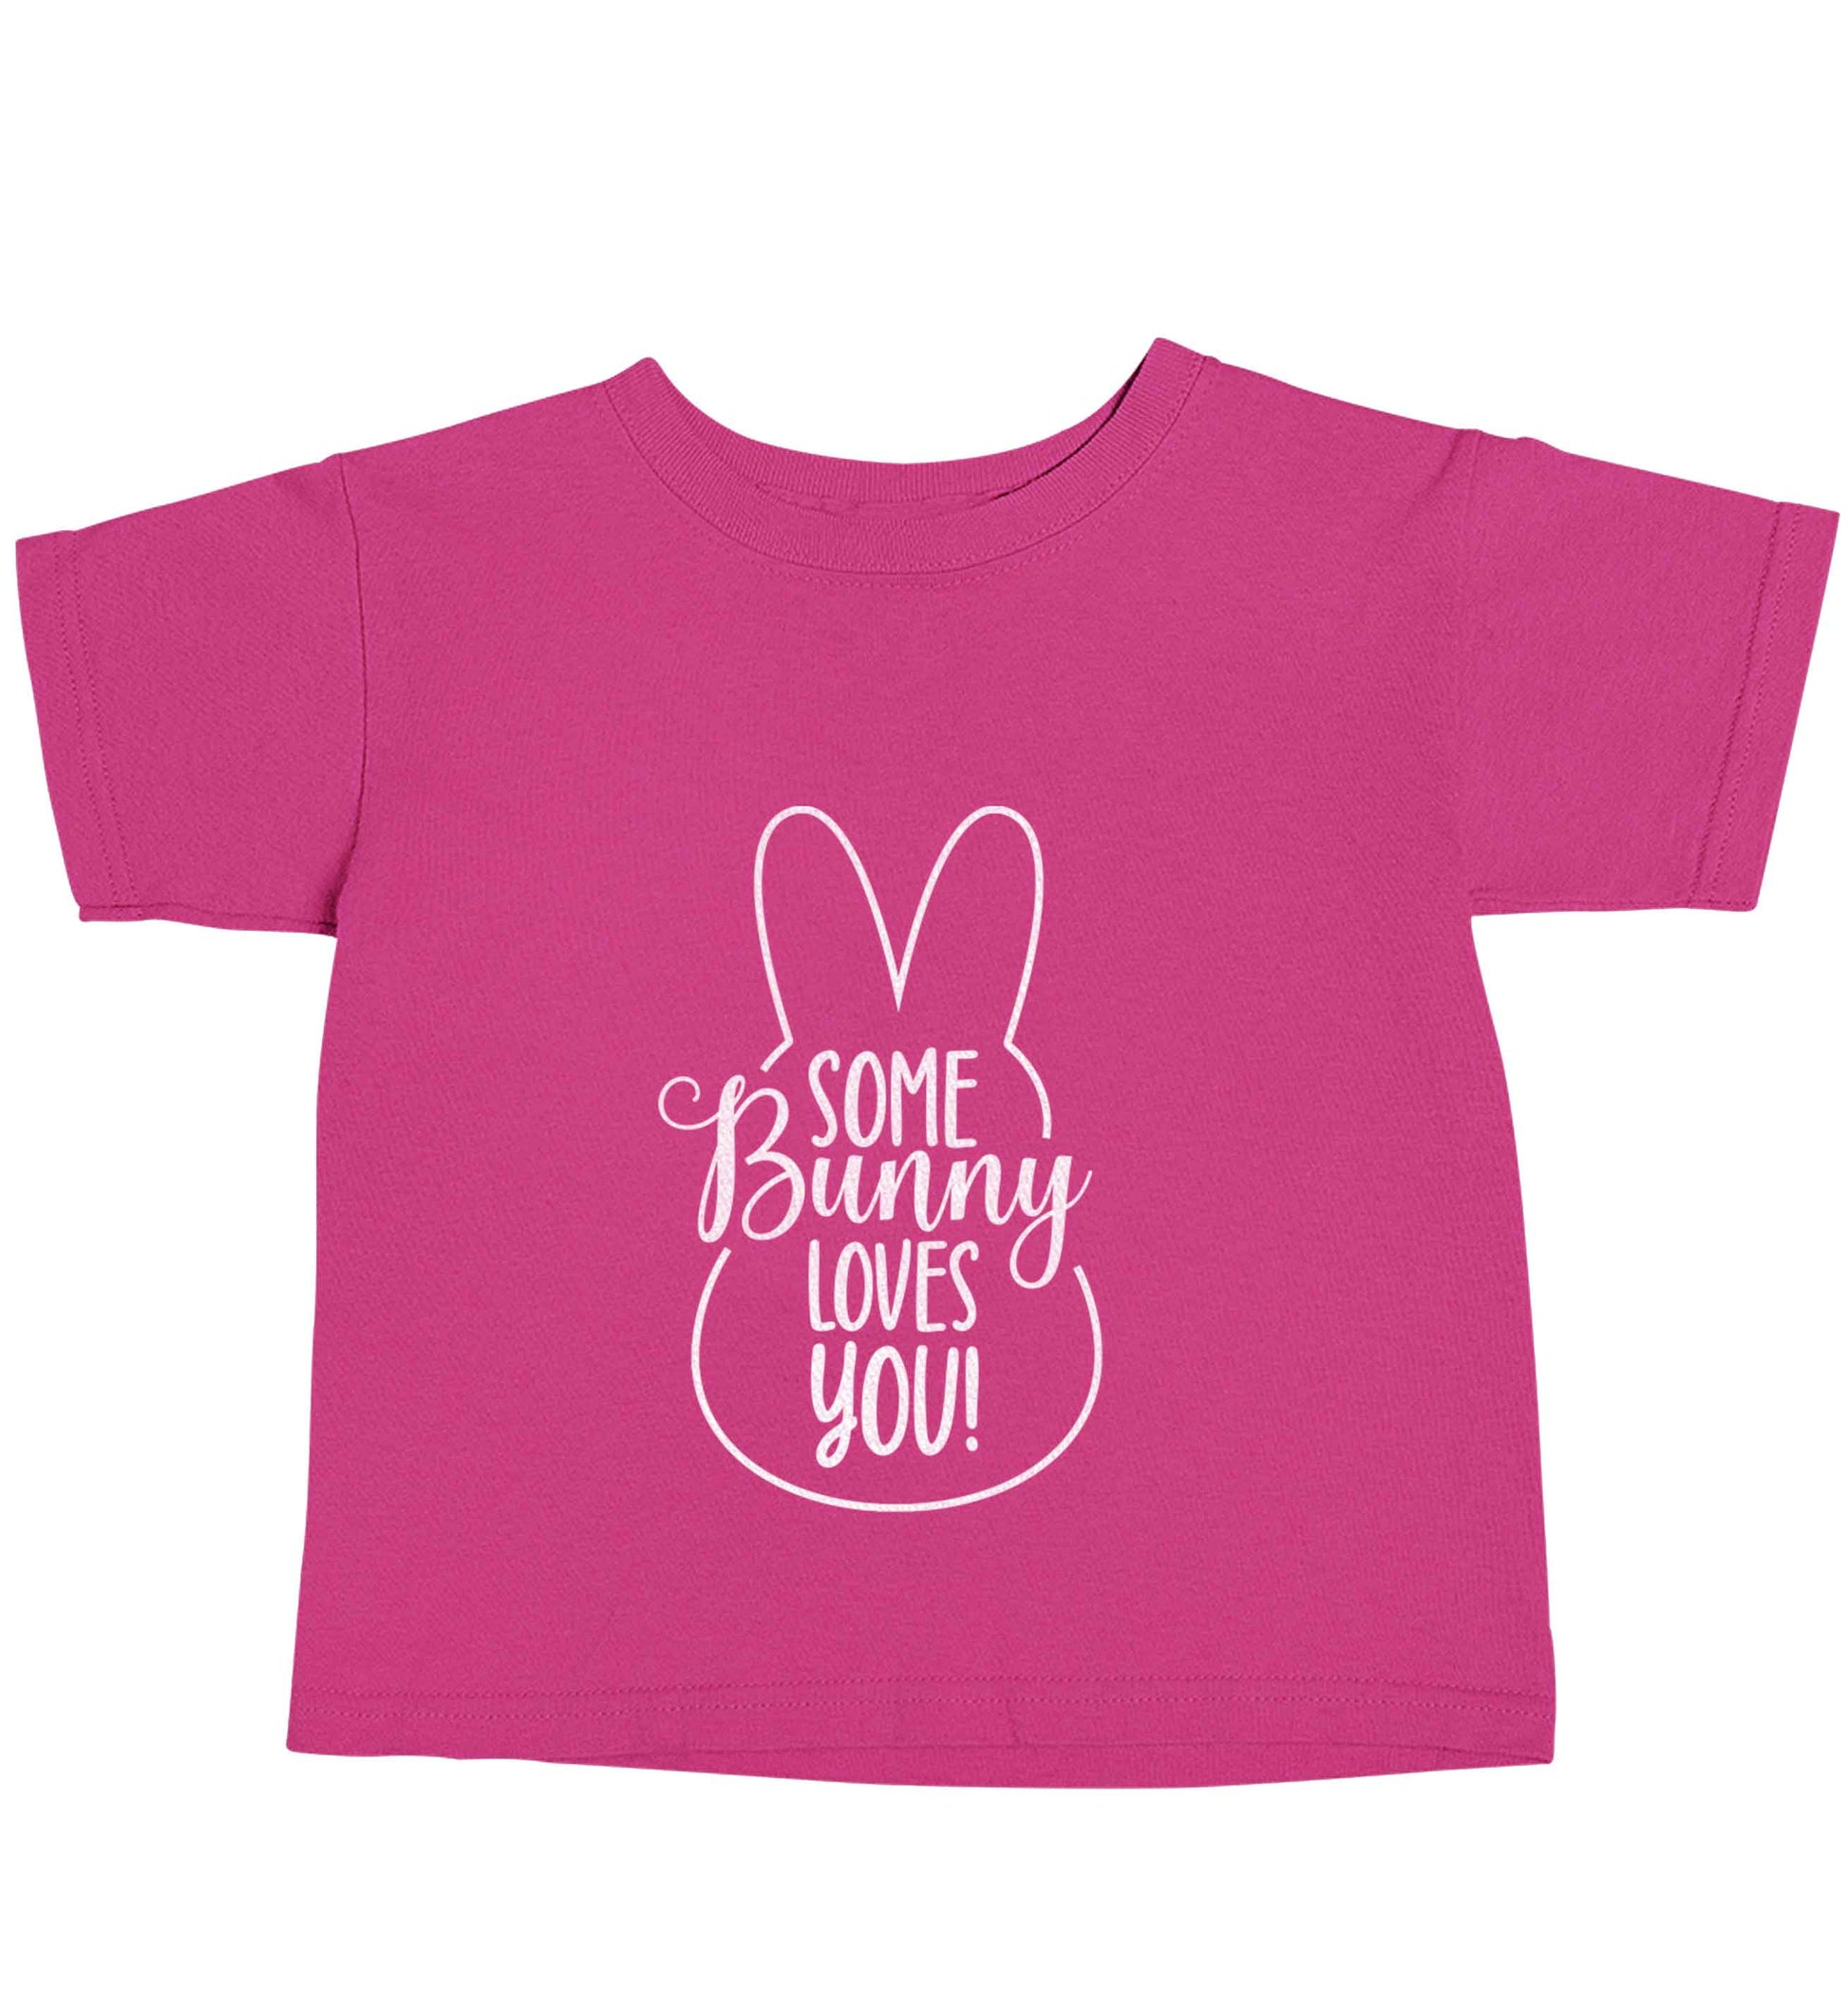 Some bunny loves you pink baby toddler Tshirt 2 Years